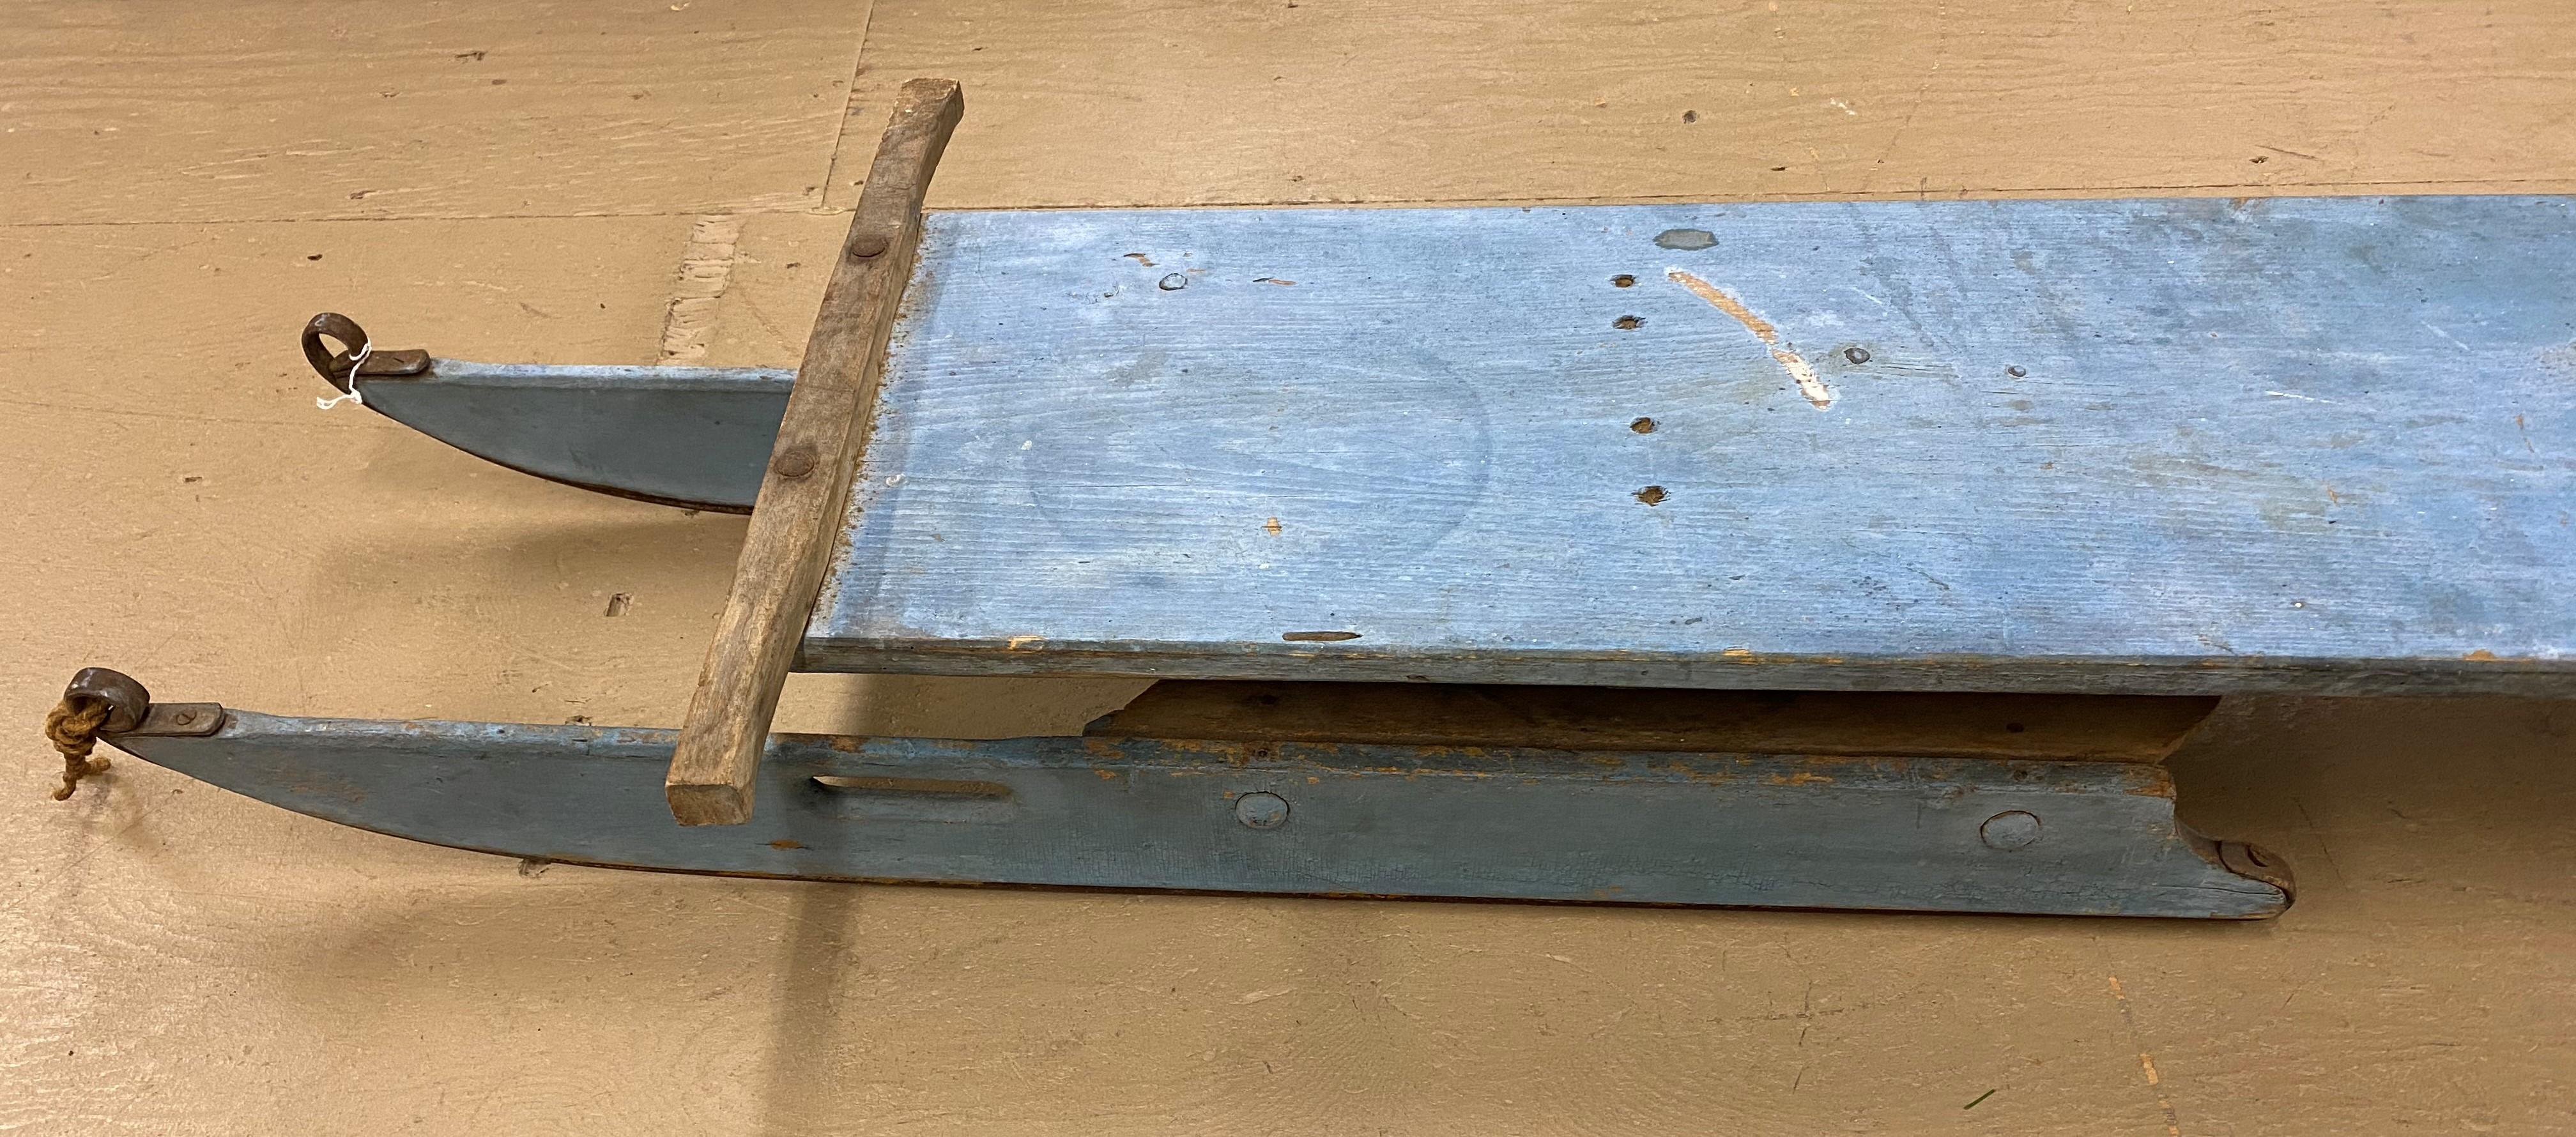 A fine example of an early 20th century wooden traverse with two sets of metal edge runners, in old blue paint. Many of these traverse sleds were used in the logging industry with horses to drag log loads from the woods, and some were used for